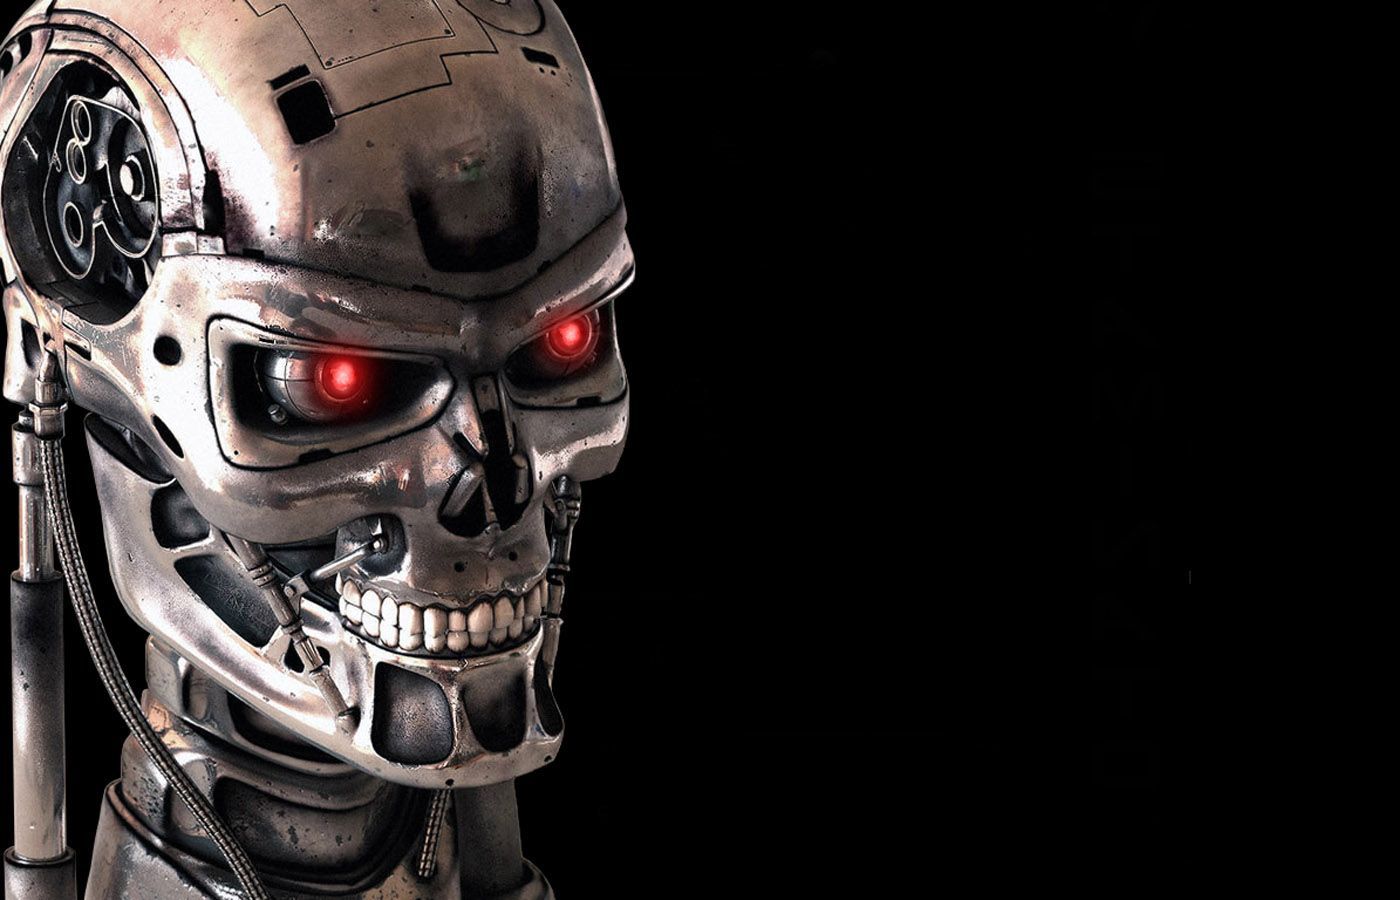 47 The Terminator HD Wallpapers | Backgrounds - Wallpaper Abyss